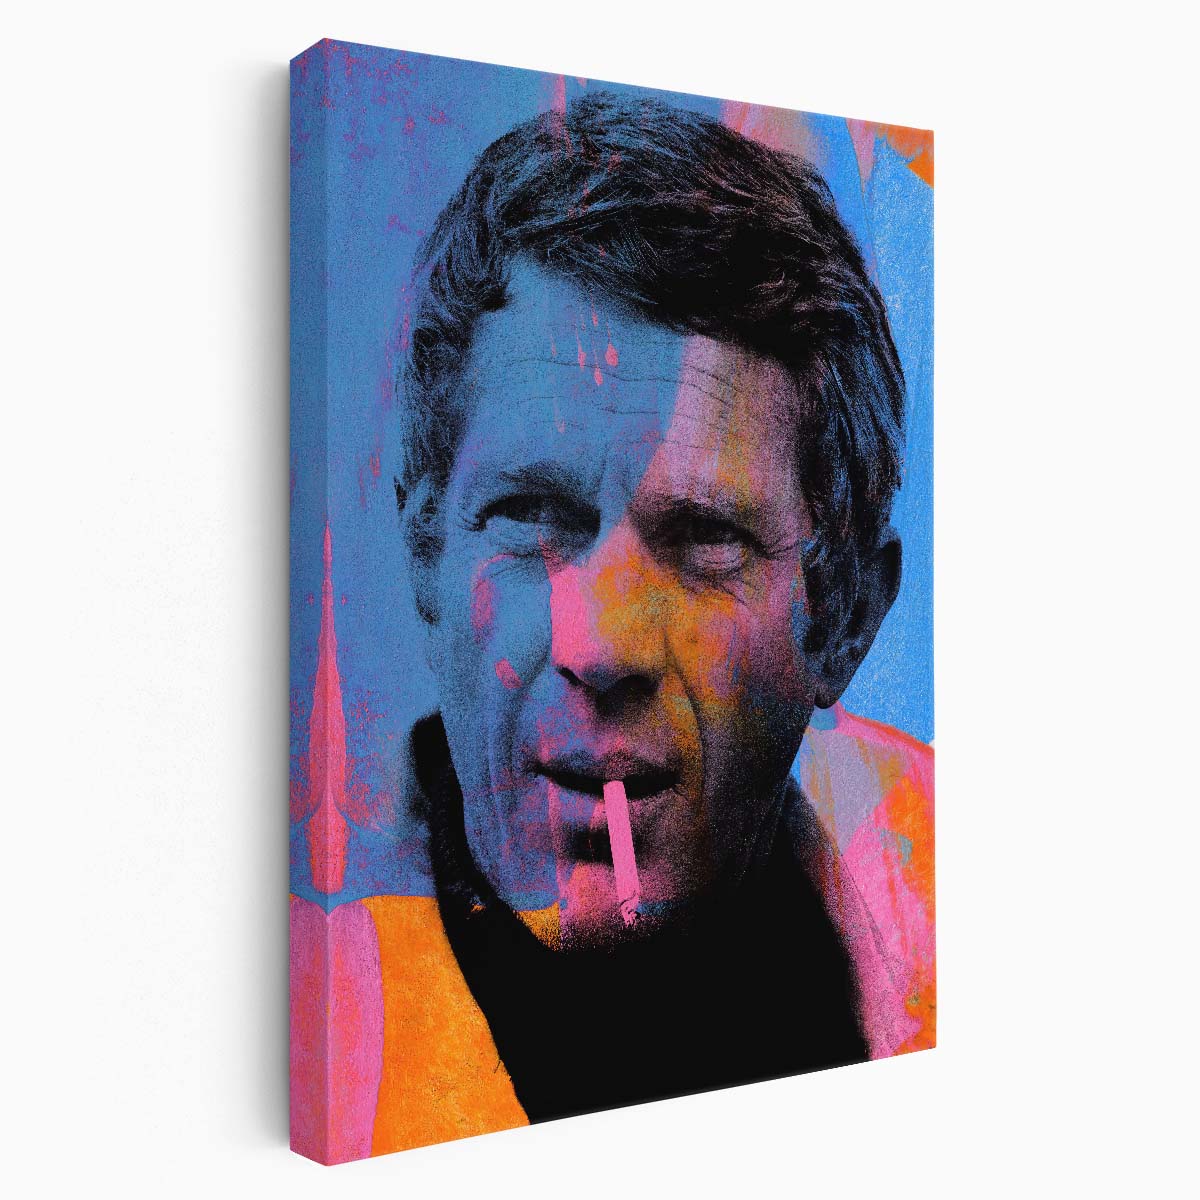 Steve McQueen Bright Colors Wall Art by Luxuriance Designs. Made in USA.